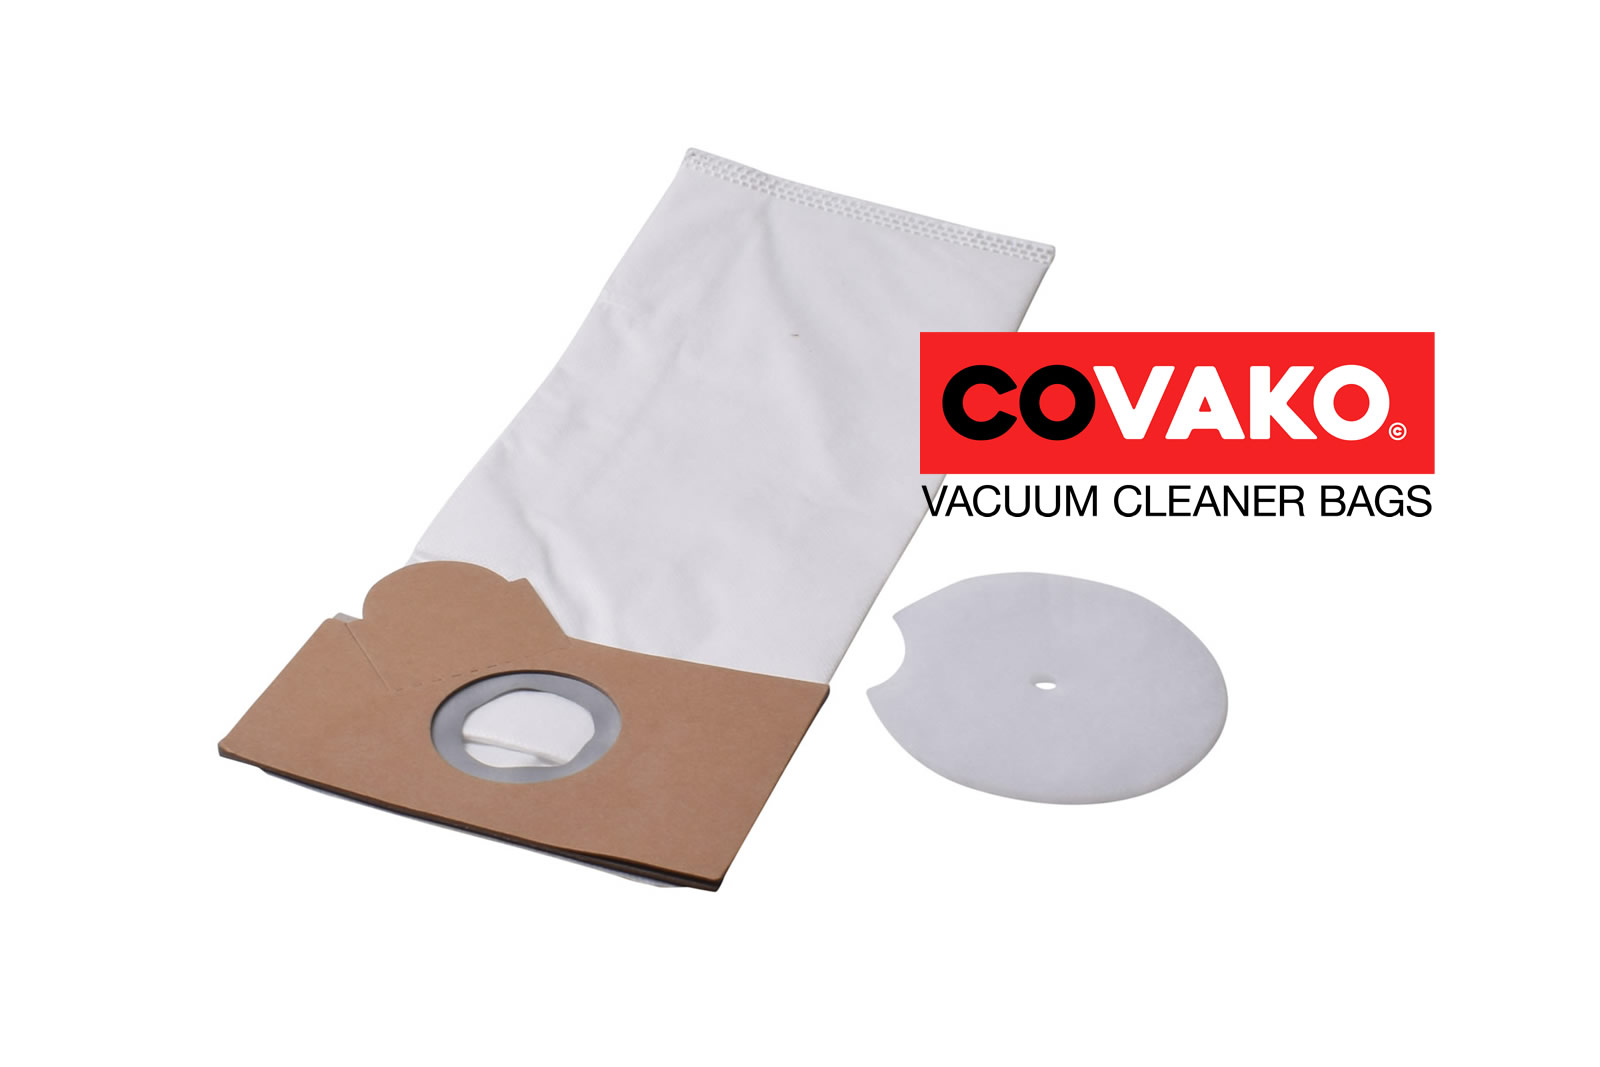 Nilco Combi 17-30 / Synthesis - Nilco vacuum cleaner bags